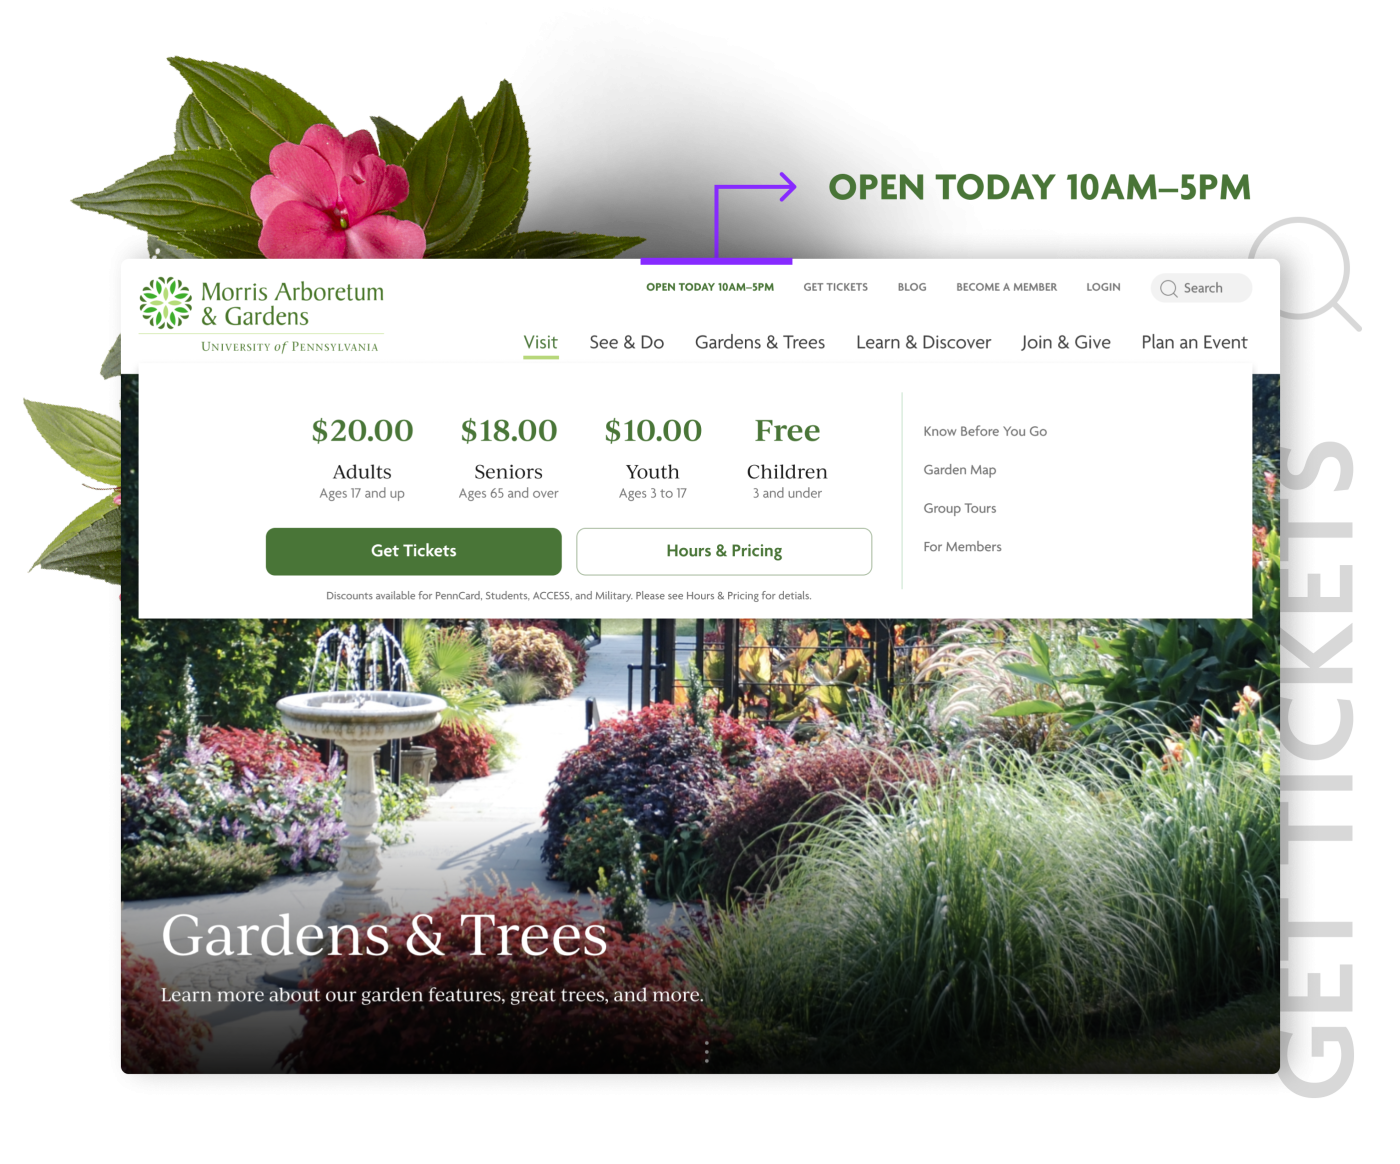 the Morris Arboretum & Gardens website's expanded mega-menu navigation calling out the open hours and get tickets and surrounded by flowers